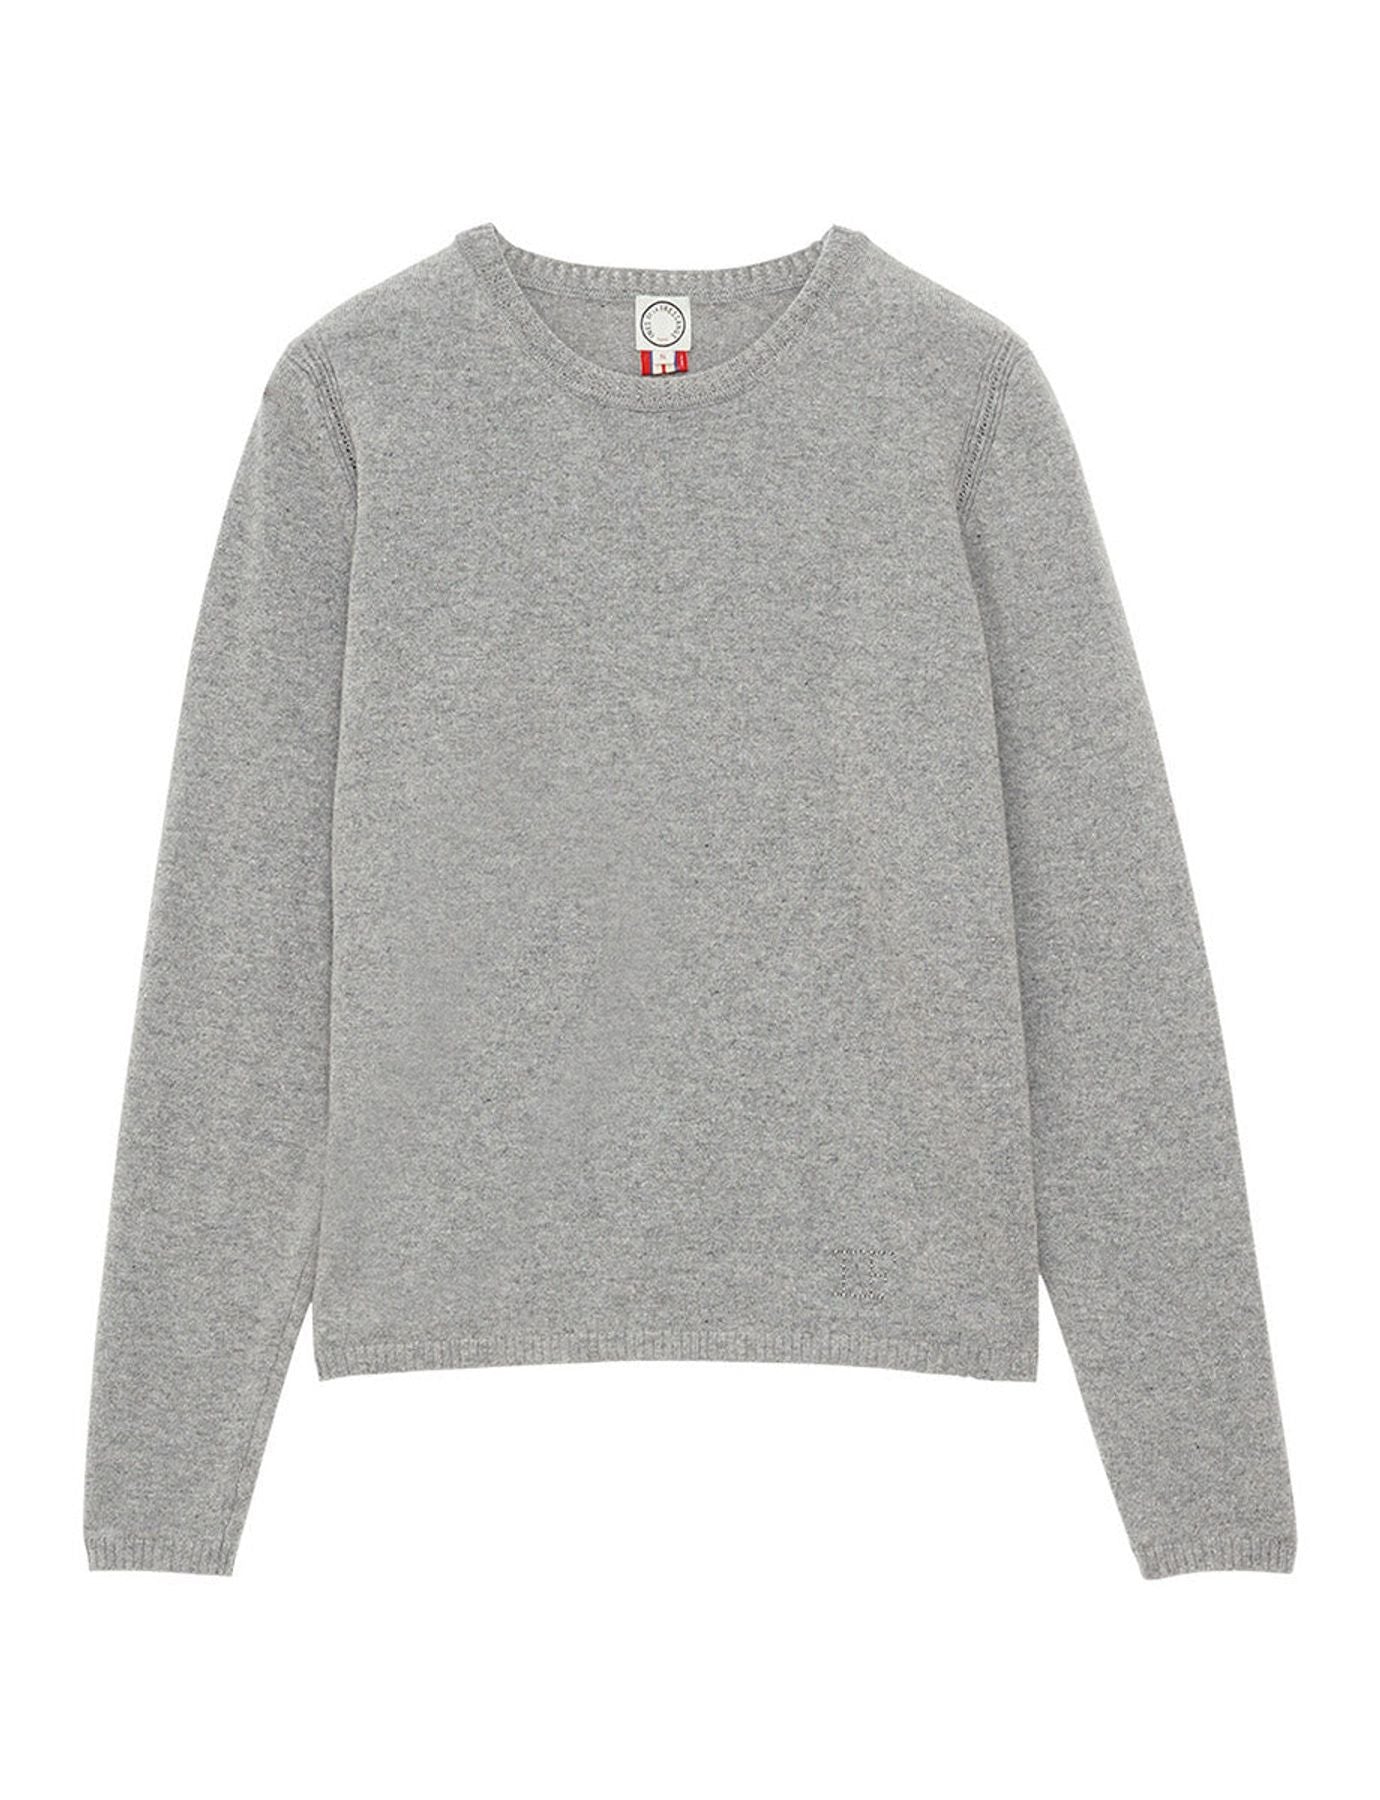 sweater-angelina-gray-broderie-ton-sur-ton